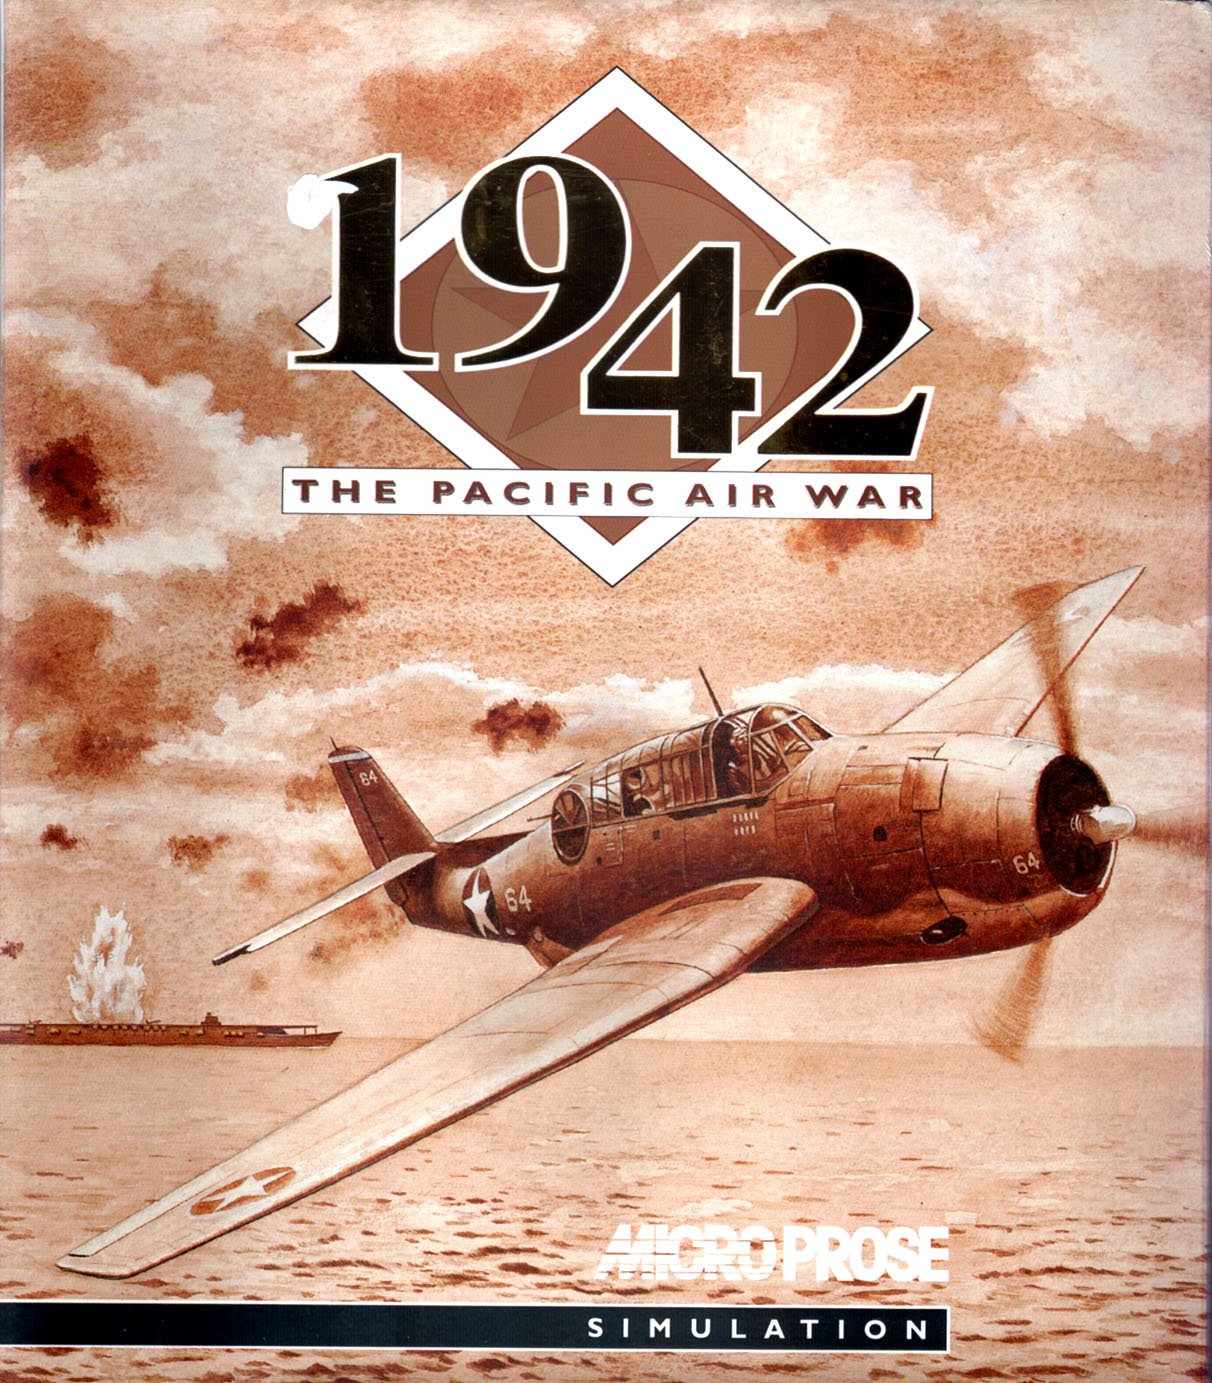 Image of 1942: The Pacific Air War